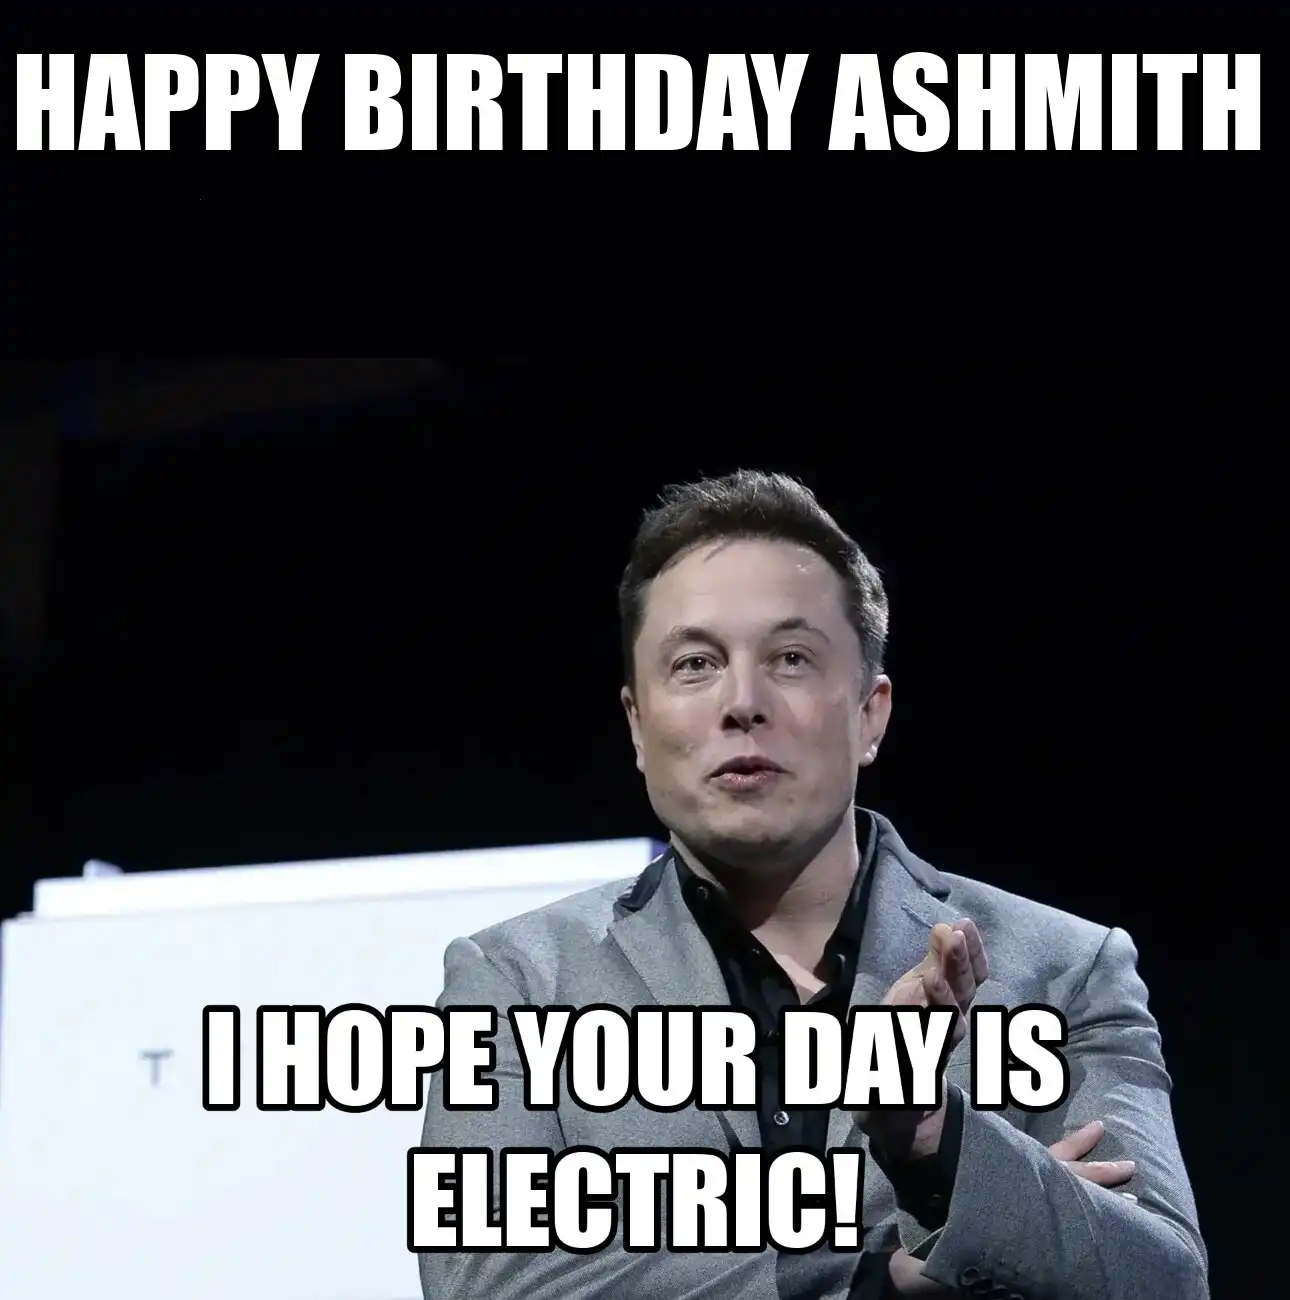 Happy Birthday Ashmith I Hope Your Day Is Electric Meme